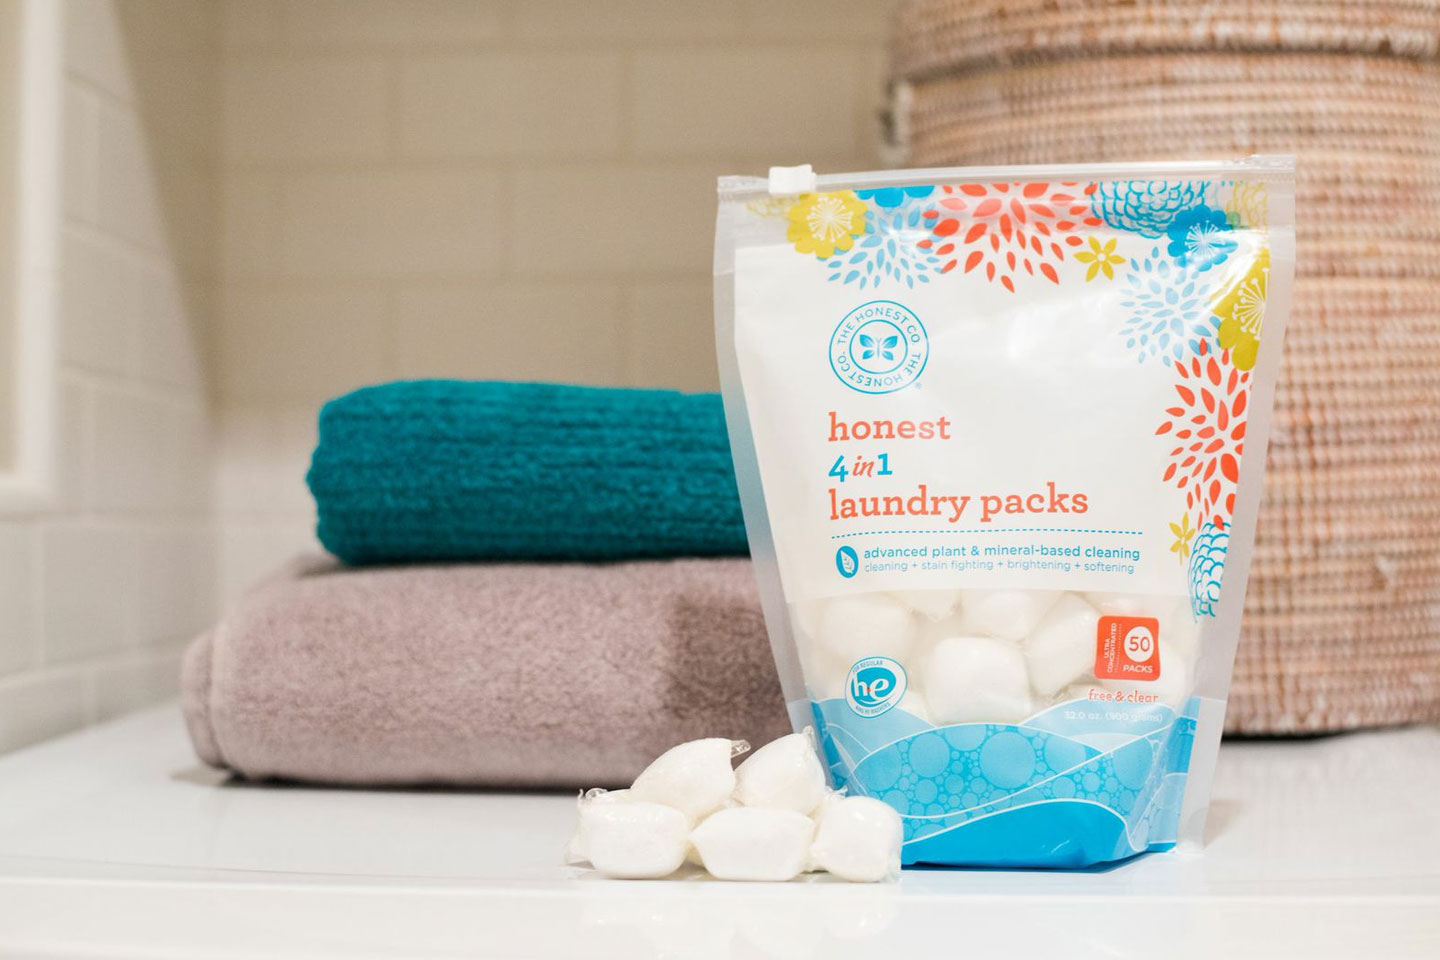 The Honest Company 4-in-1 Laundry Packs